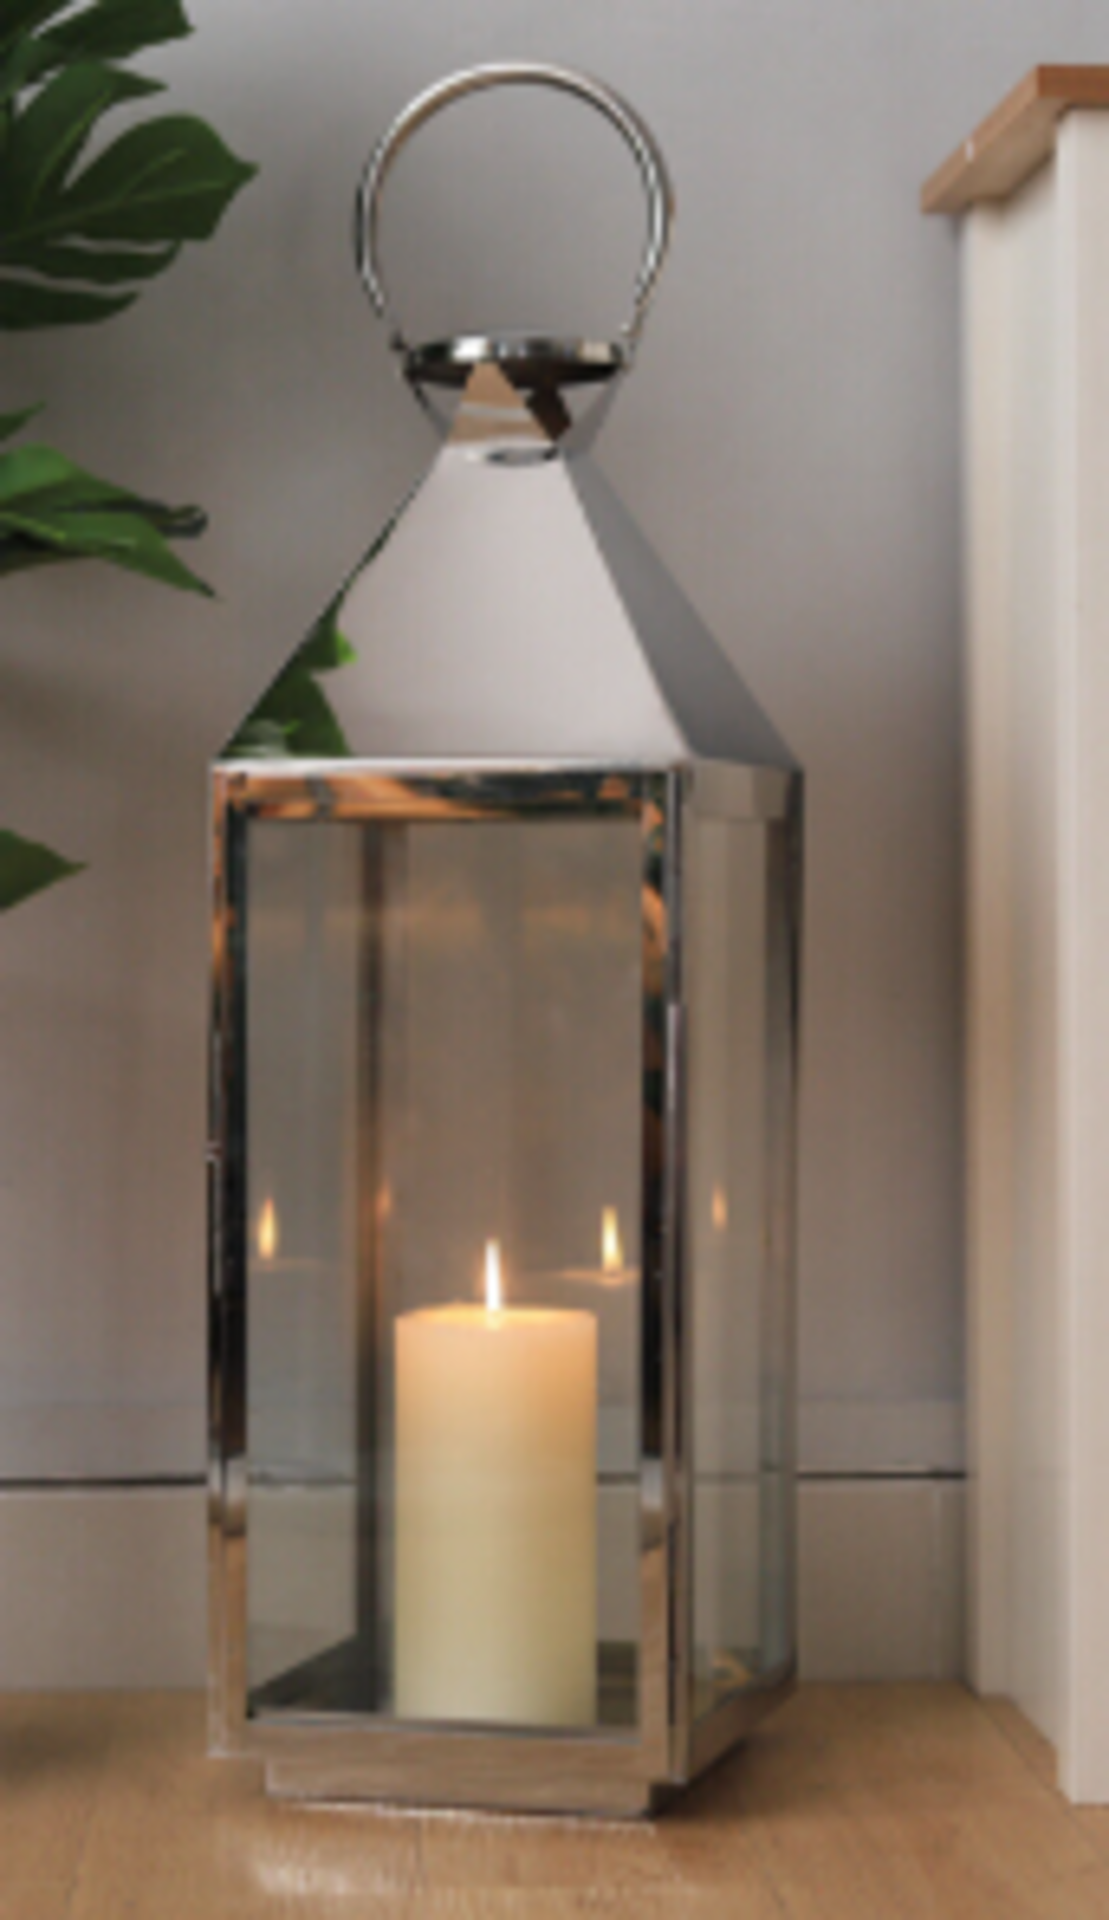 RRP £150 Brand New Boxed Candle Lantern Holder - Image 3 of 3